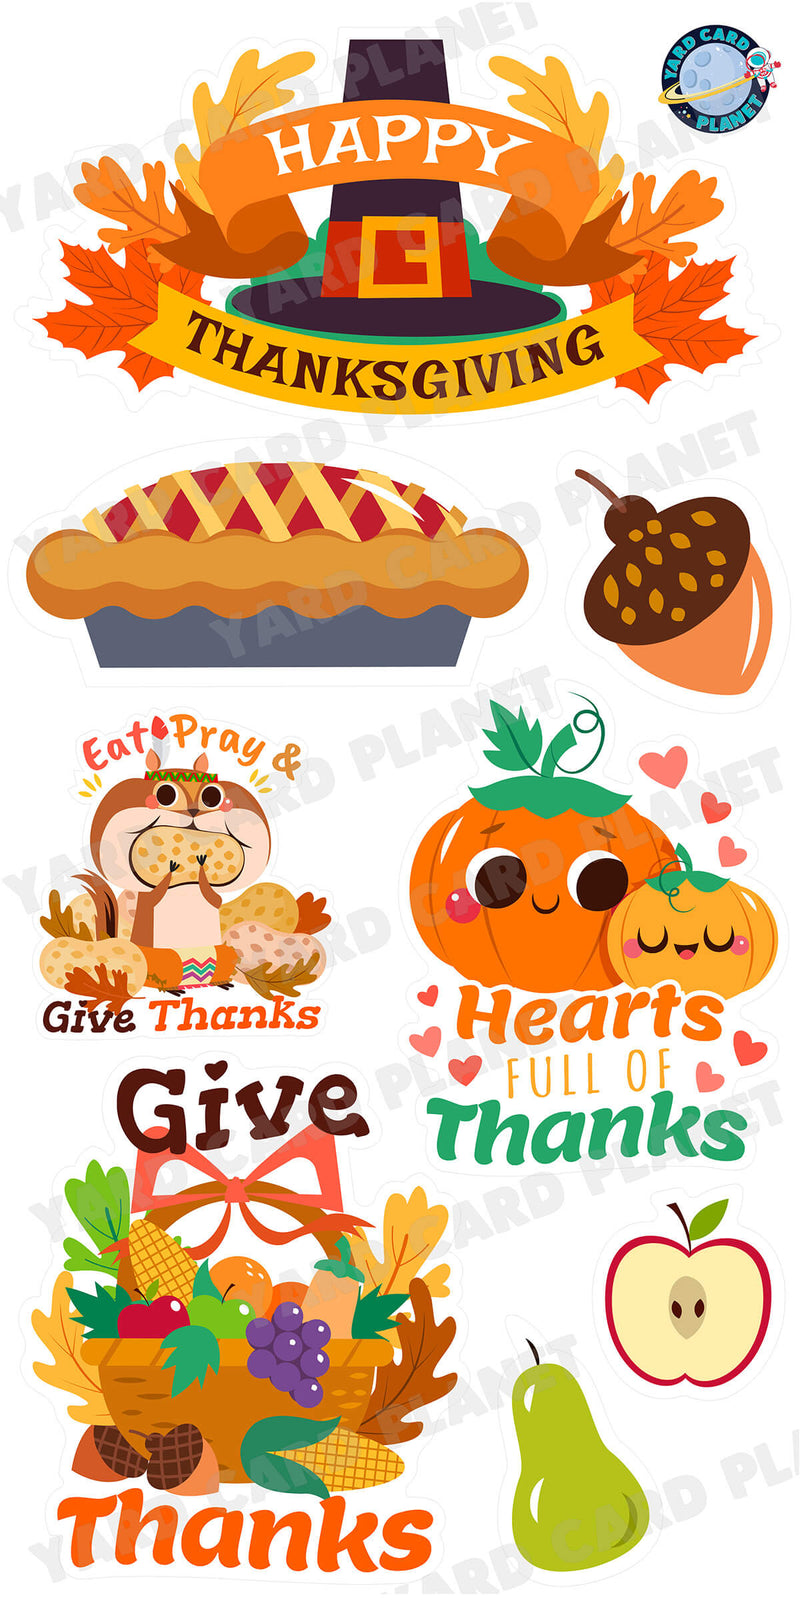 Happy Thanksgiving Giving Thanks EZ Quick Signs and Yard Card Flair Set